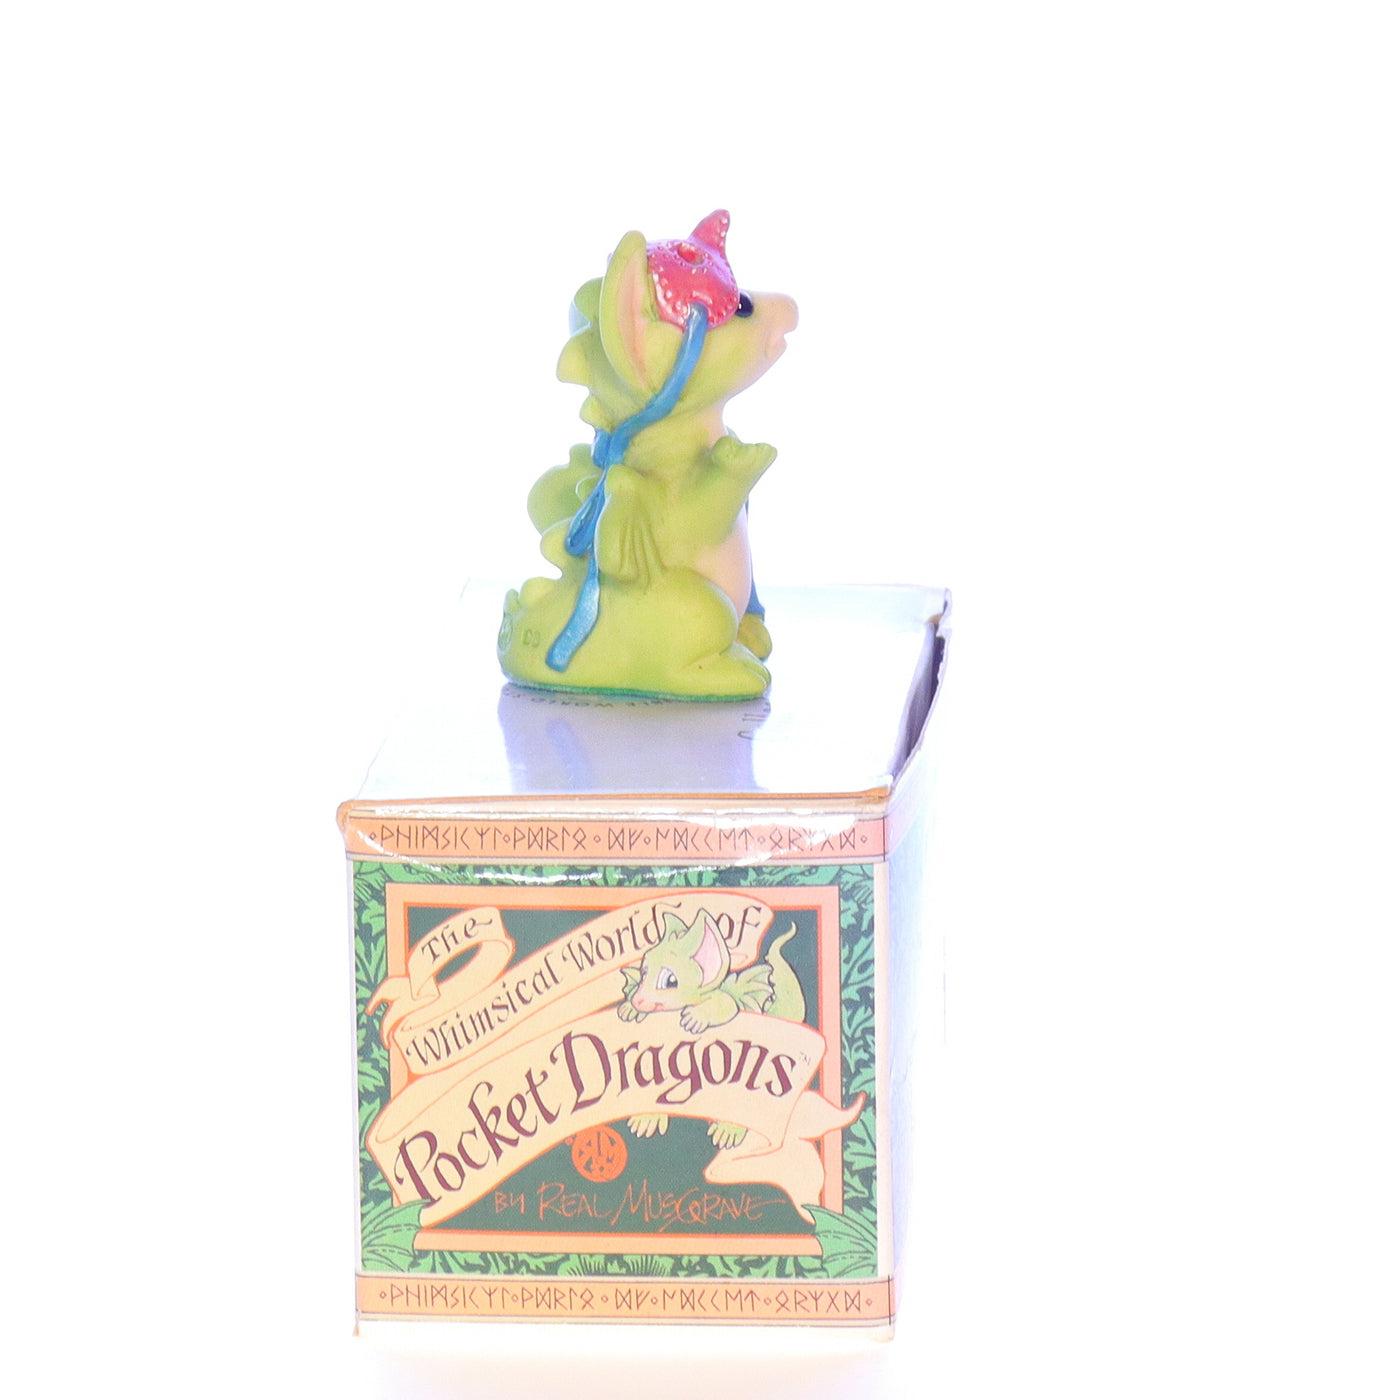 Whimsical_World_of_Pocket_Dragons_002853_Its_Me_Halloween_Figurine_1997_Box Right View